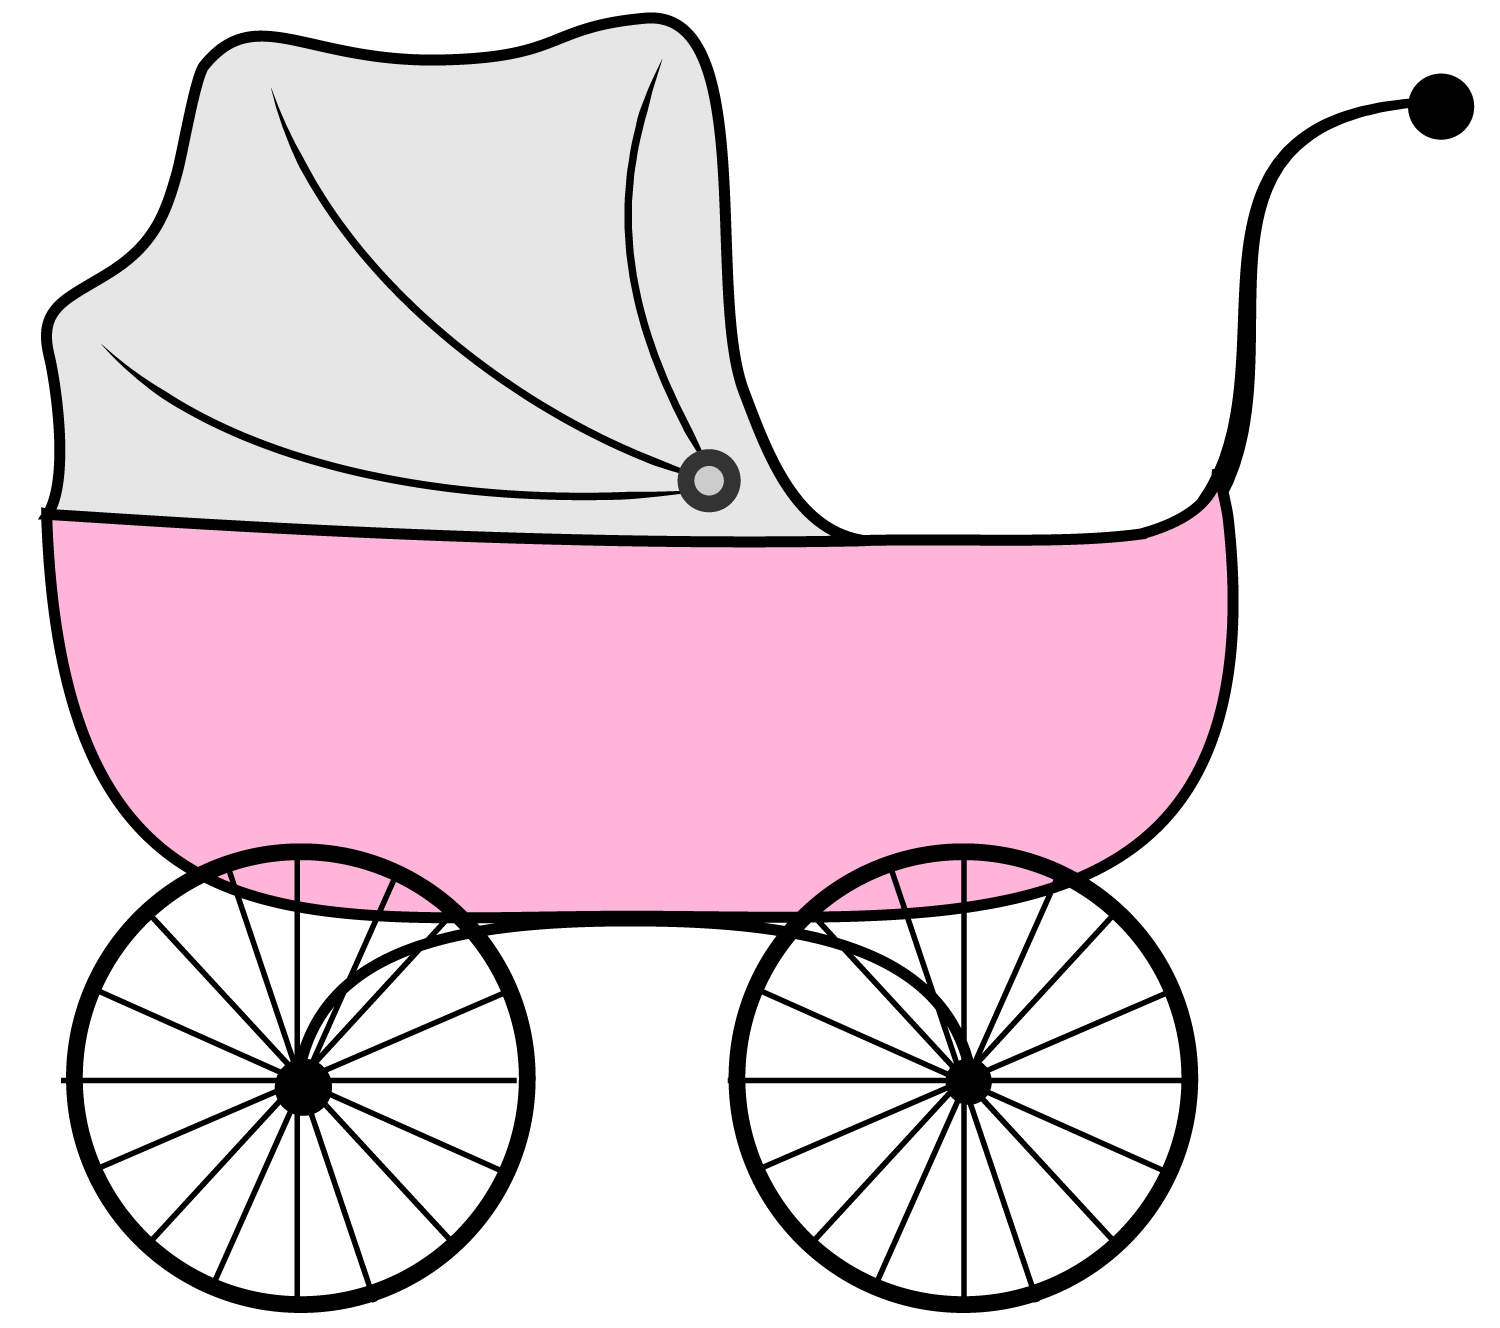 Baby Carriage Clipart & Baby Carriage Clip Art Images.